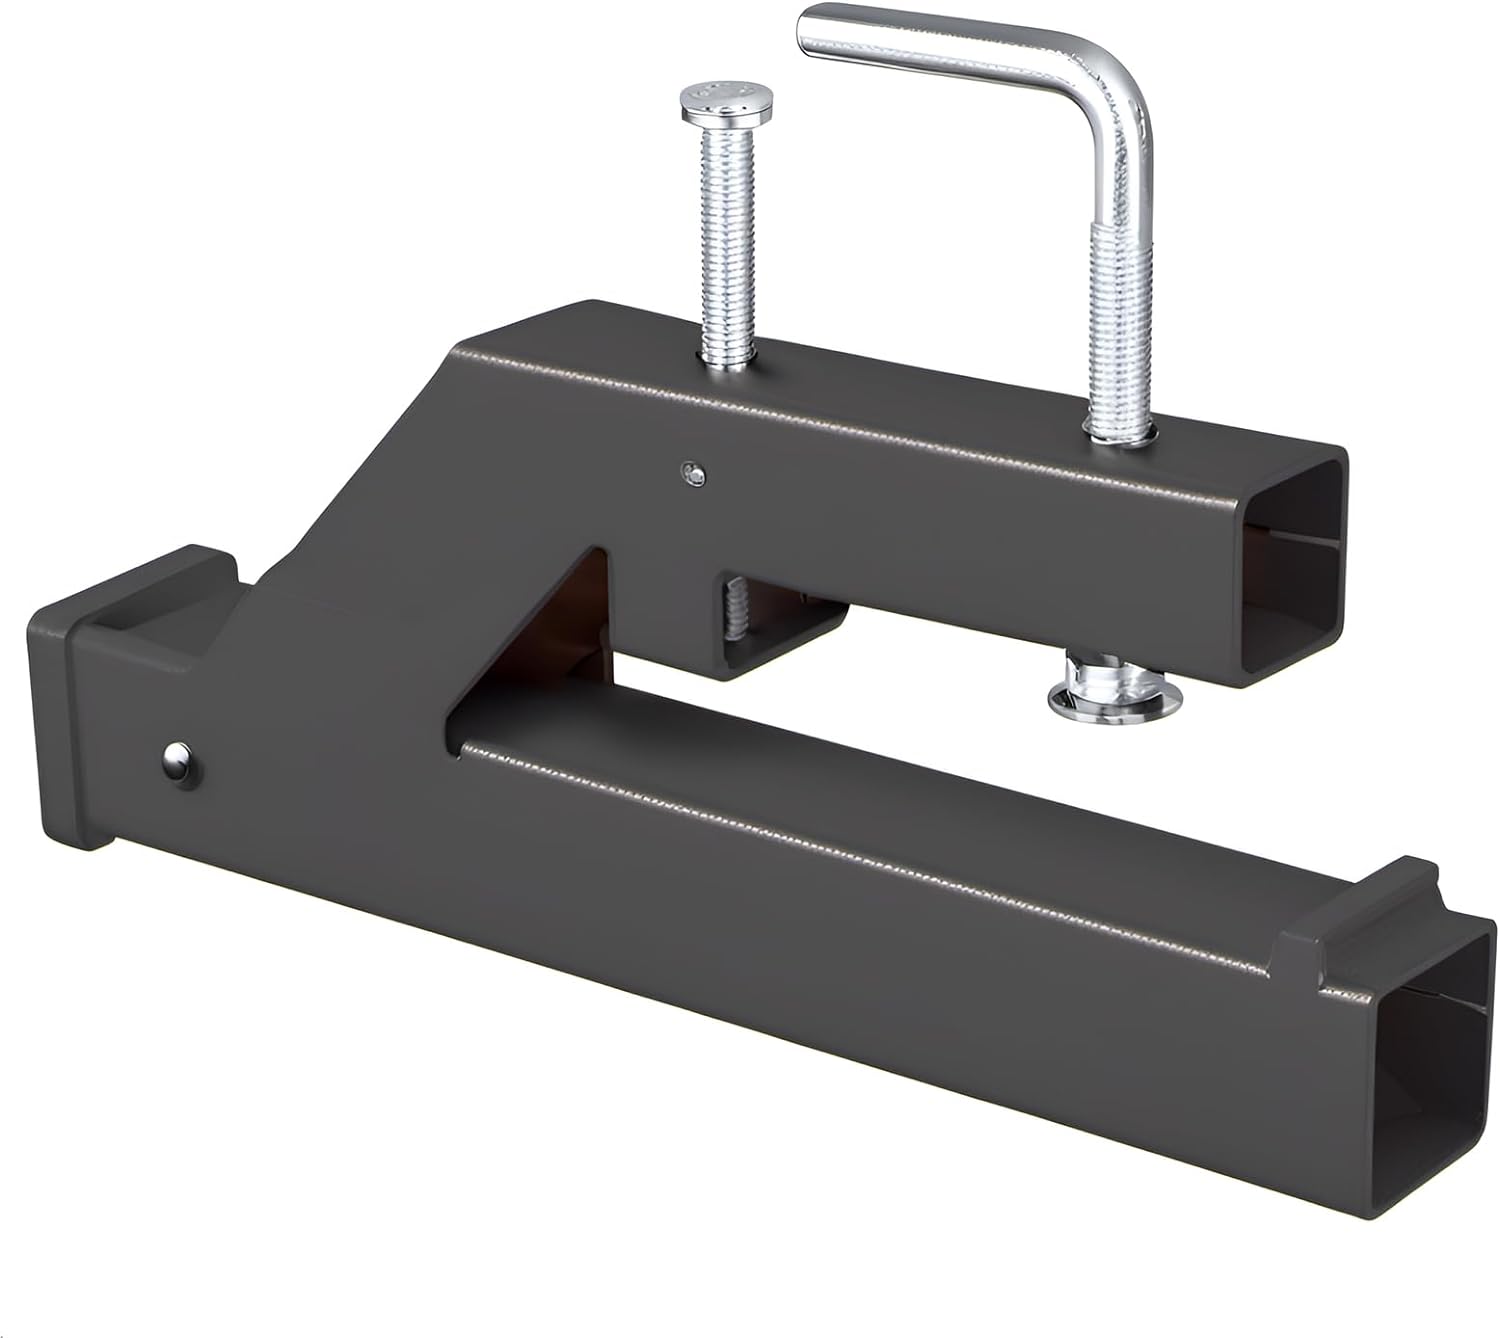 Clamp On Trailer Hitch, 2" Ball Mount Adapter, Hitch Receiver Compatible with Deere Bobcat Tractor Bucket, 1PC Bucket Hitch